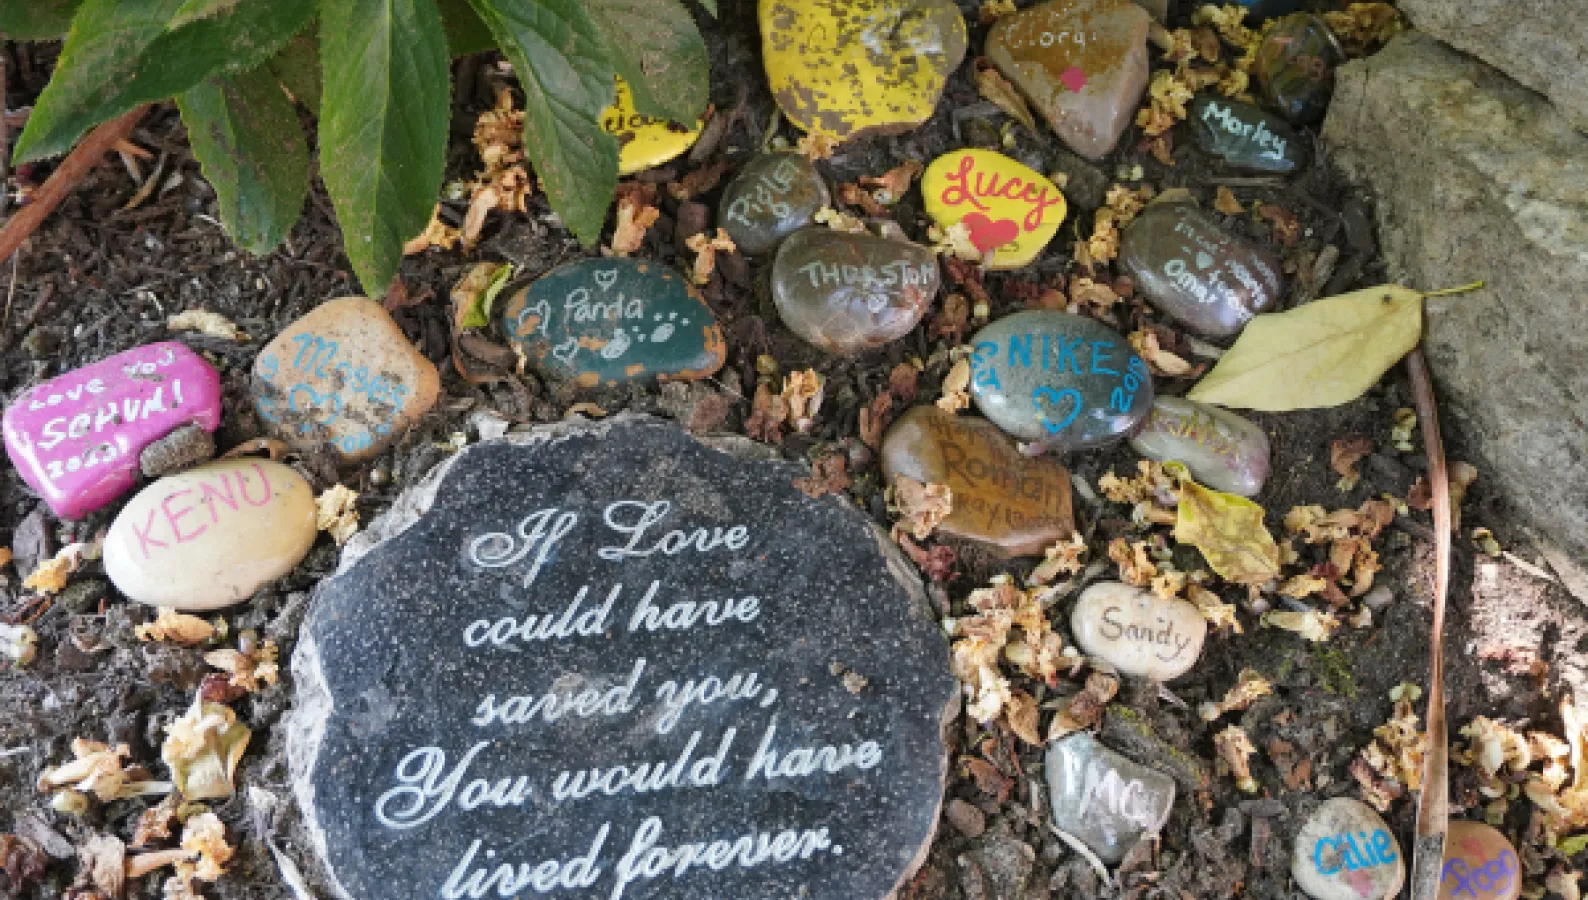 stones with pet names and a stone with text "if love could have save you you would have lived forever"